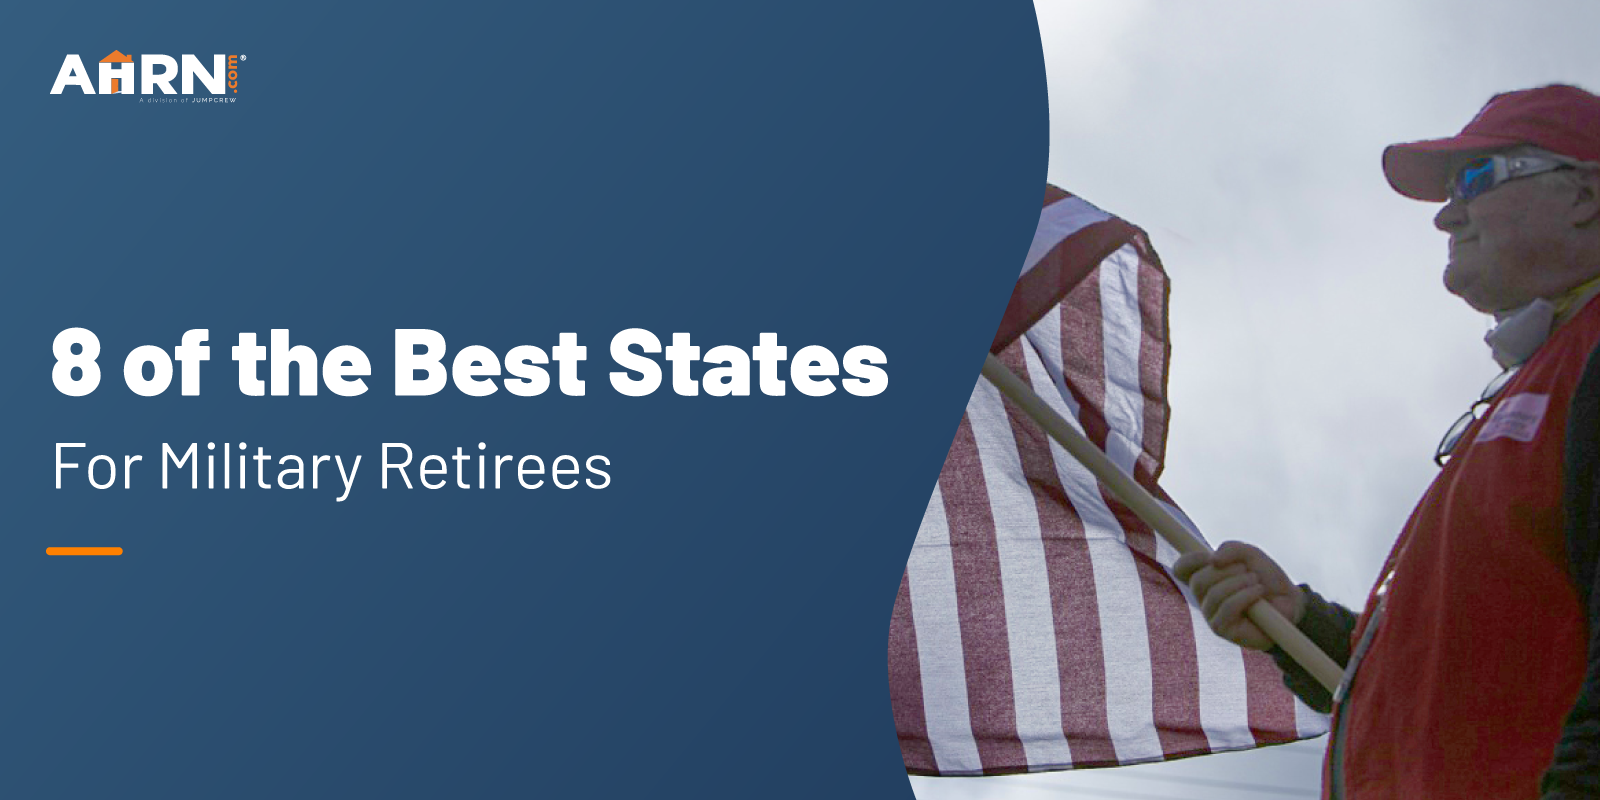 8 of the Best States for Military Retirees